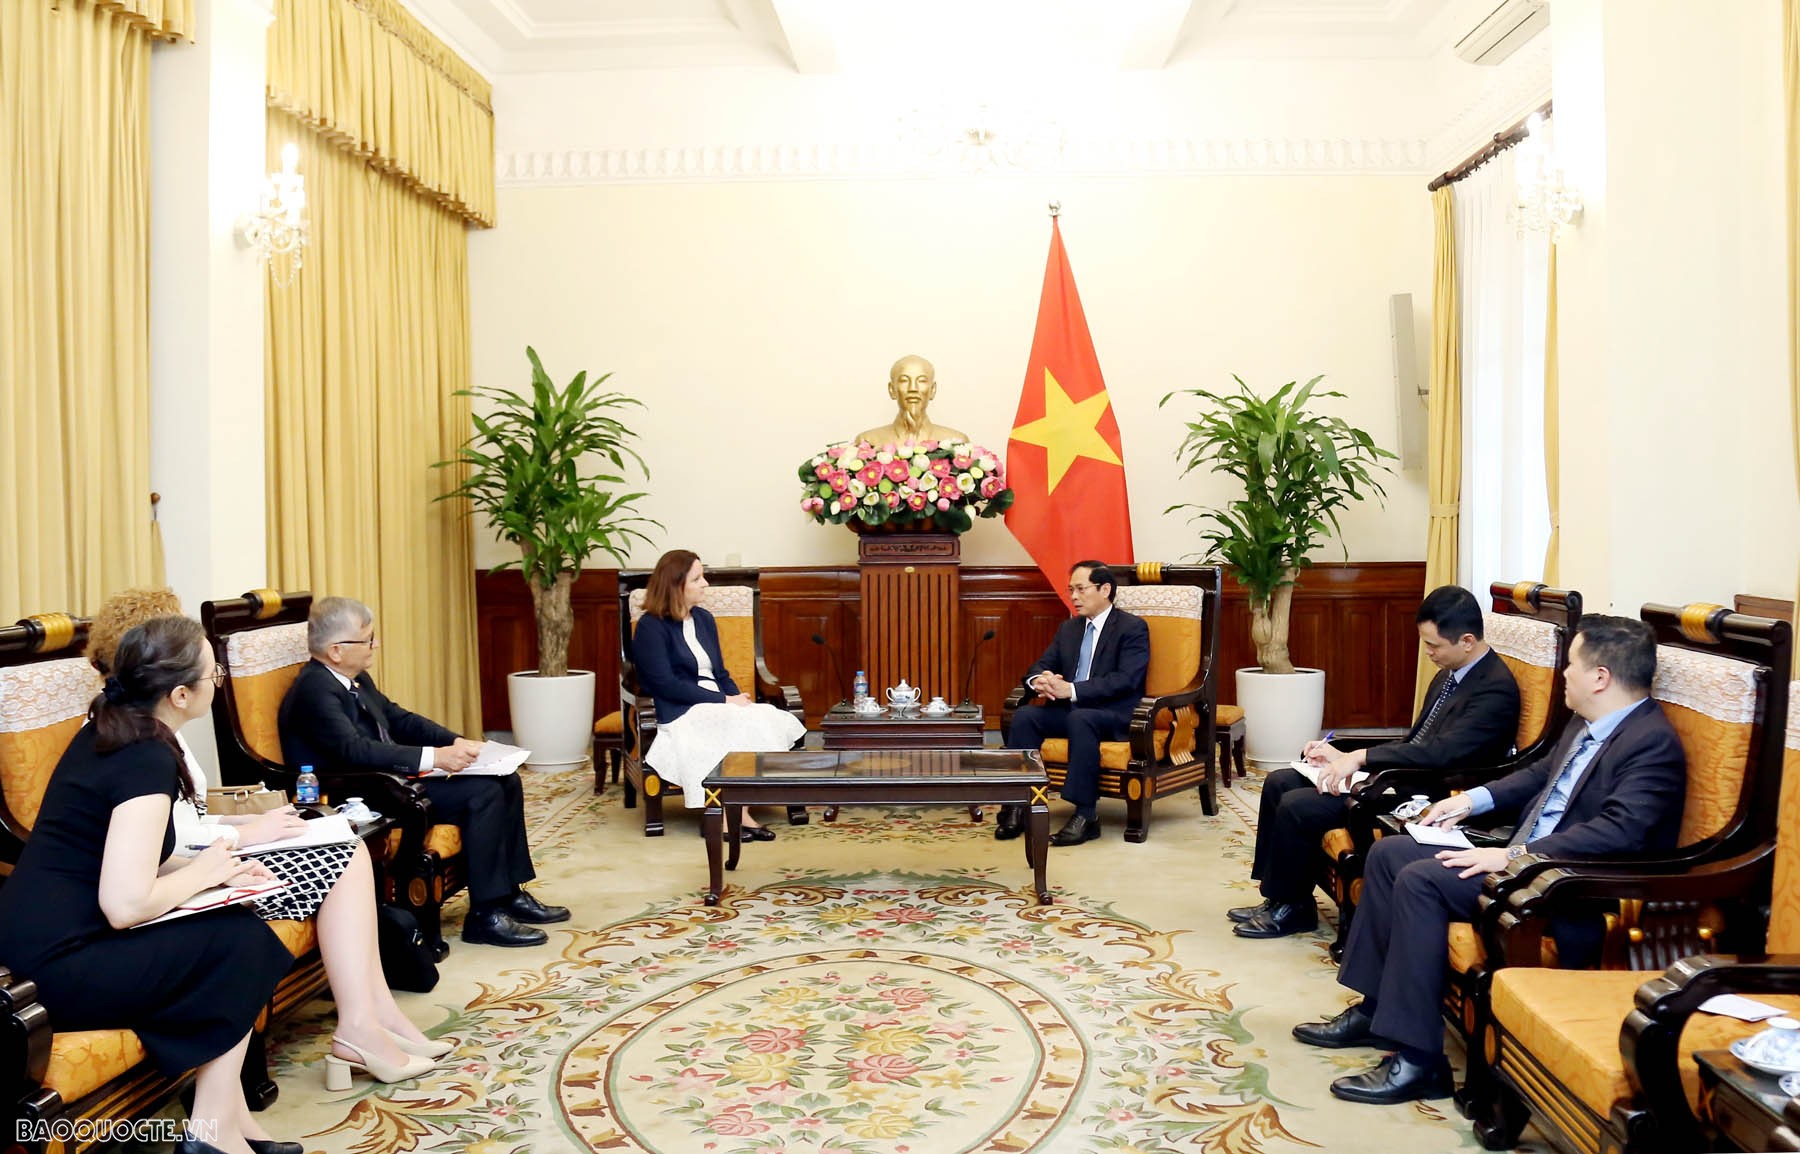 FM Bui Thanh Son received Polish Undersecretary of State to strengthen multifaceted ties